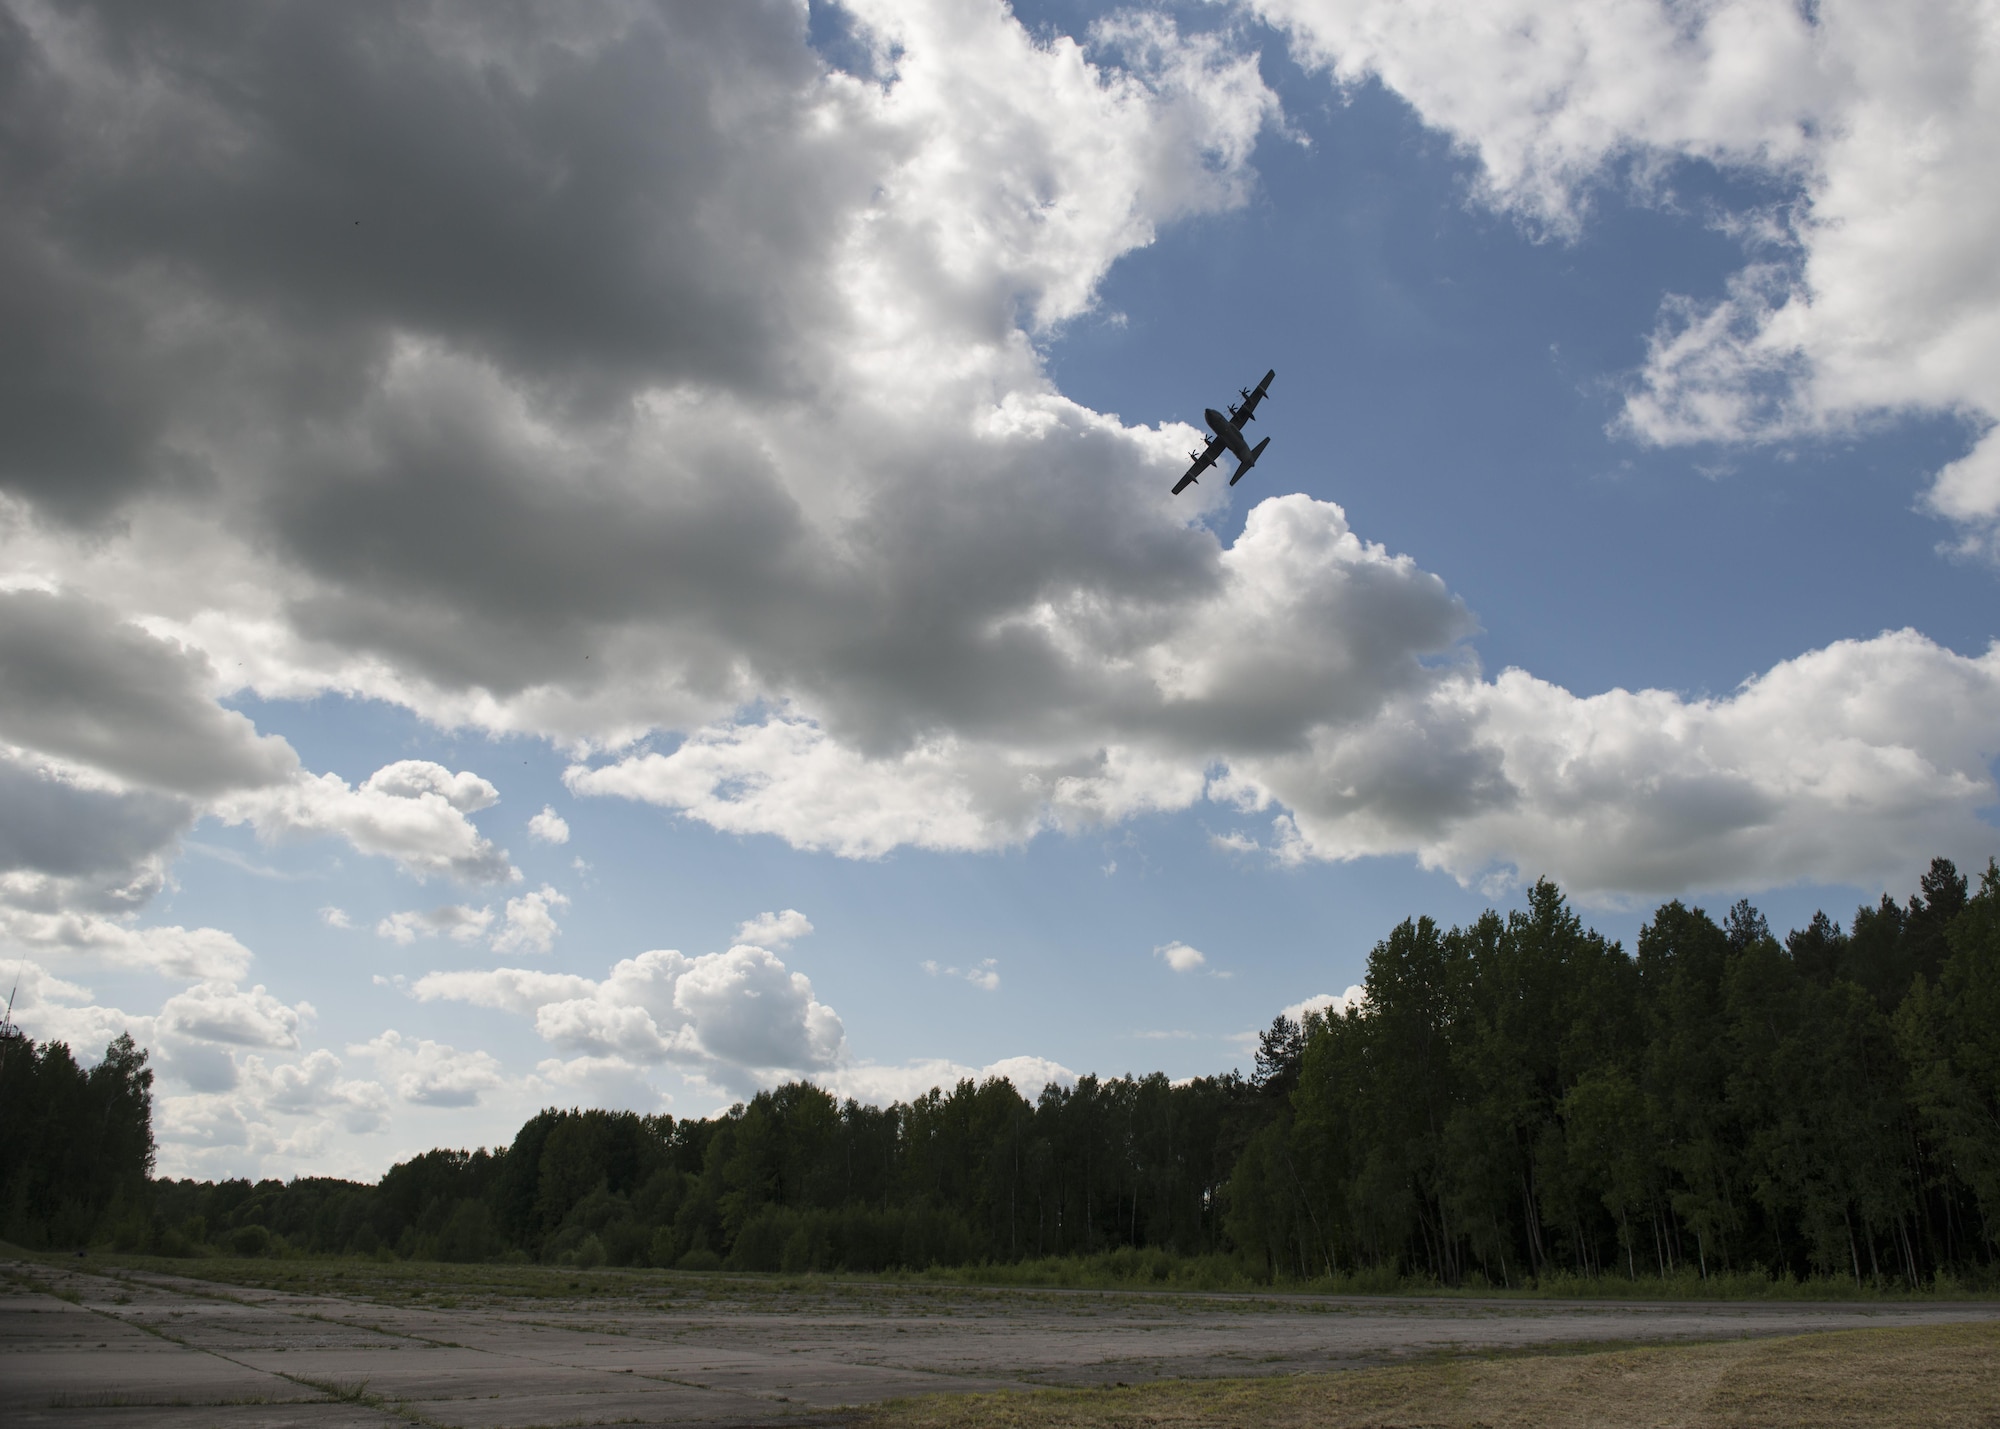 A U.S. MC-130J Commando II from the 352d Special Operations Wing, performs a low level fly-by prior to inserting heavy equipment and personnel during the joint, combined military demo for FLAMING SWORD 16 in Pajuostic, Lithuania, May 20, 2016.  The MC-130J’s were deployed to Powidz, Poland as part of TROJAN FOOTPRINT 16 which rapidly deployed more than 800 Special Operations Forces personnel from NATO and partner nations across the exercise’s training areas to ensure the Alliance and partner nations are able to rapidly assemble and train anywhere they are called to do so. (U.S. Air Force photo by 1st Lt. Chris Sullivan/Released)